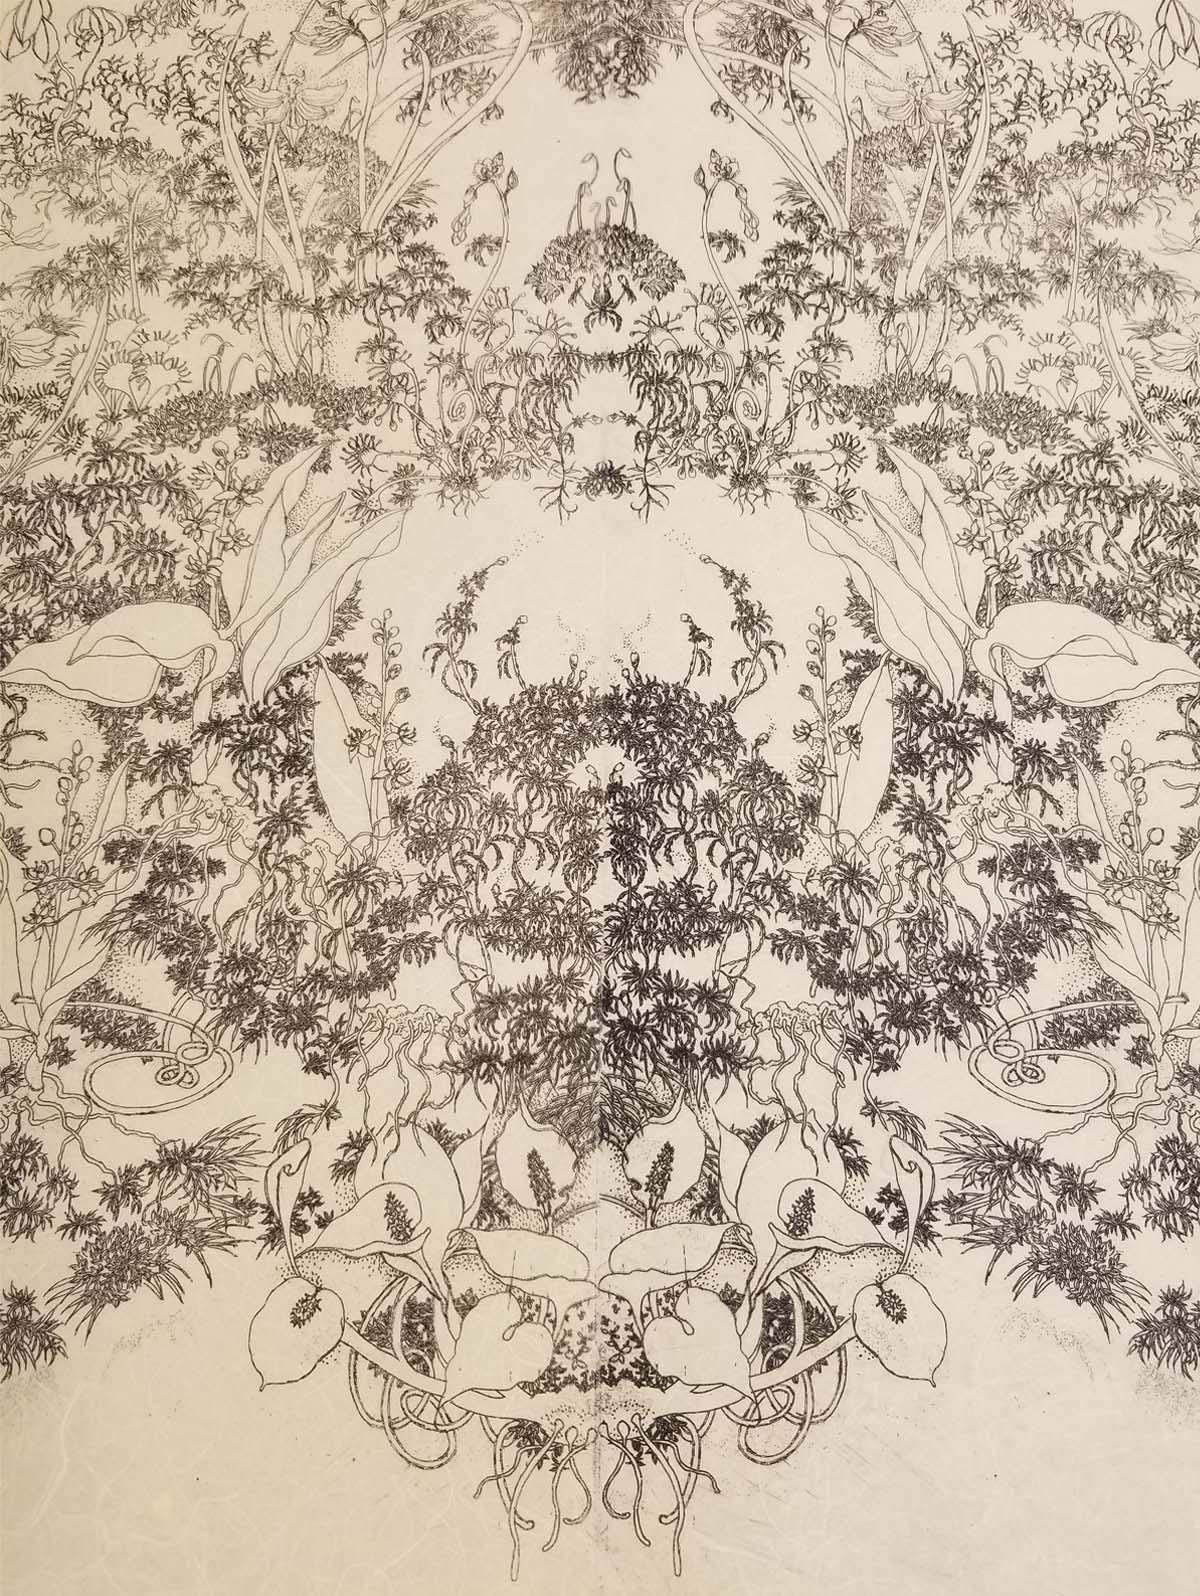 detail etching including floral and foliage